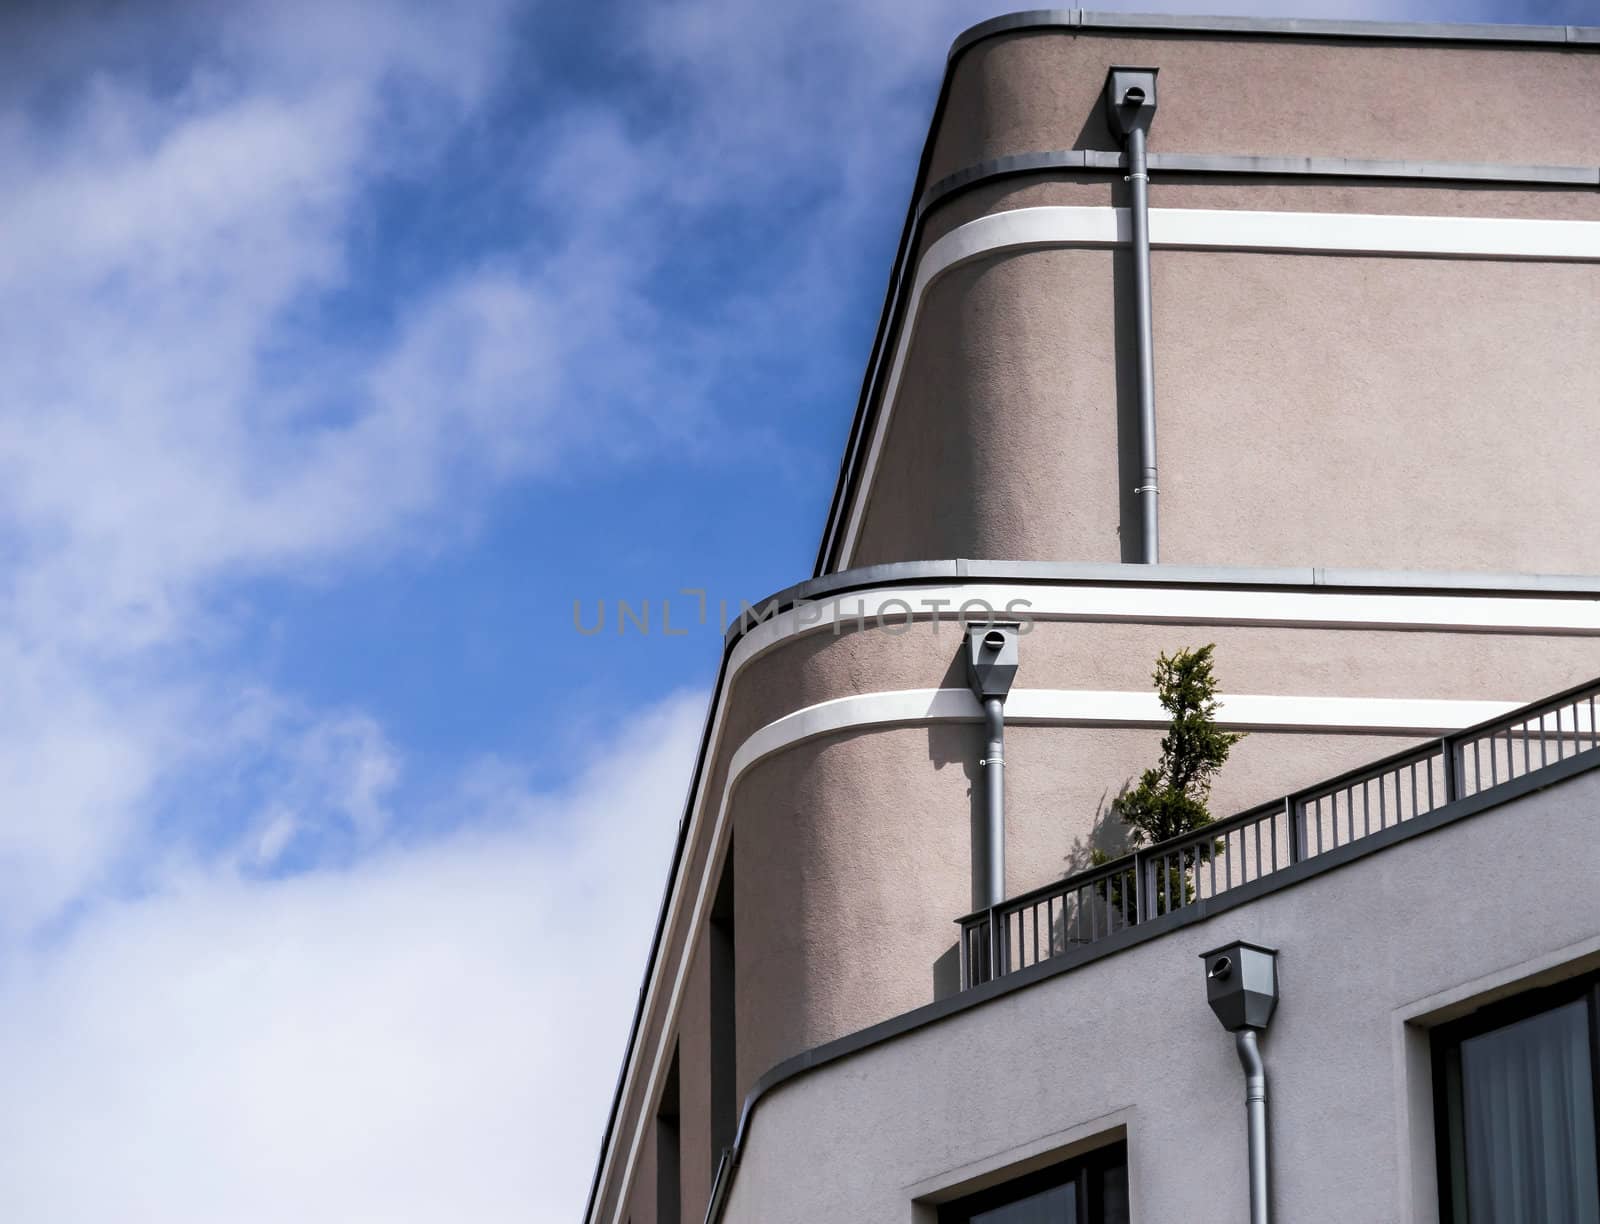 Abstract photo of the facade of a large building with three downpipes for rainwater flowing off the roof by geogif